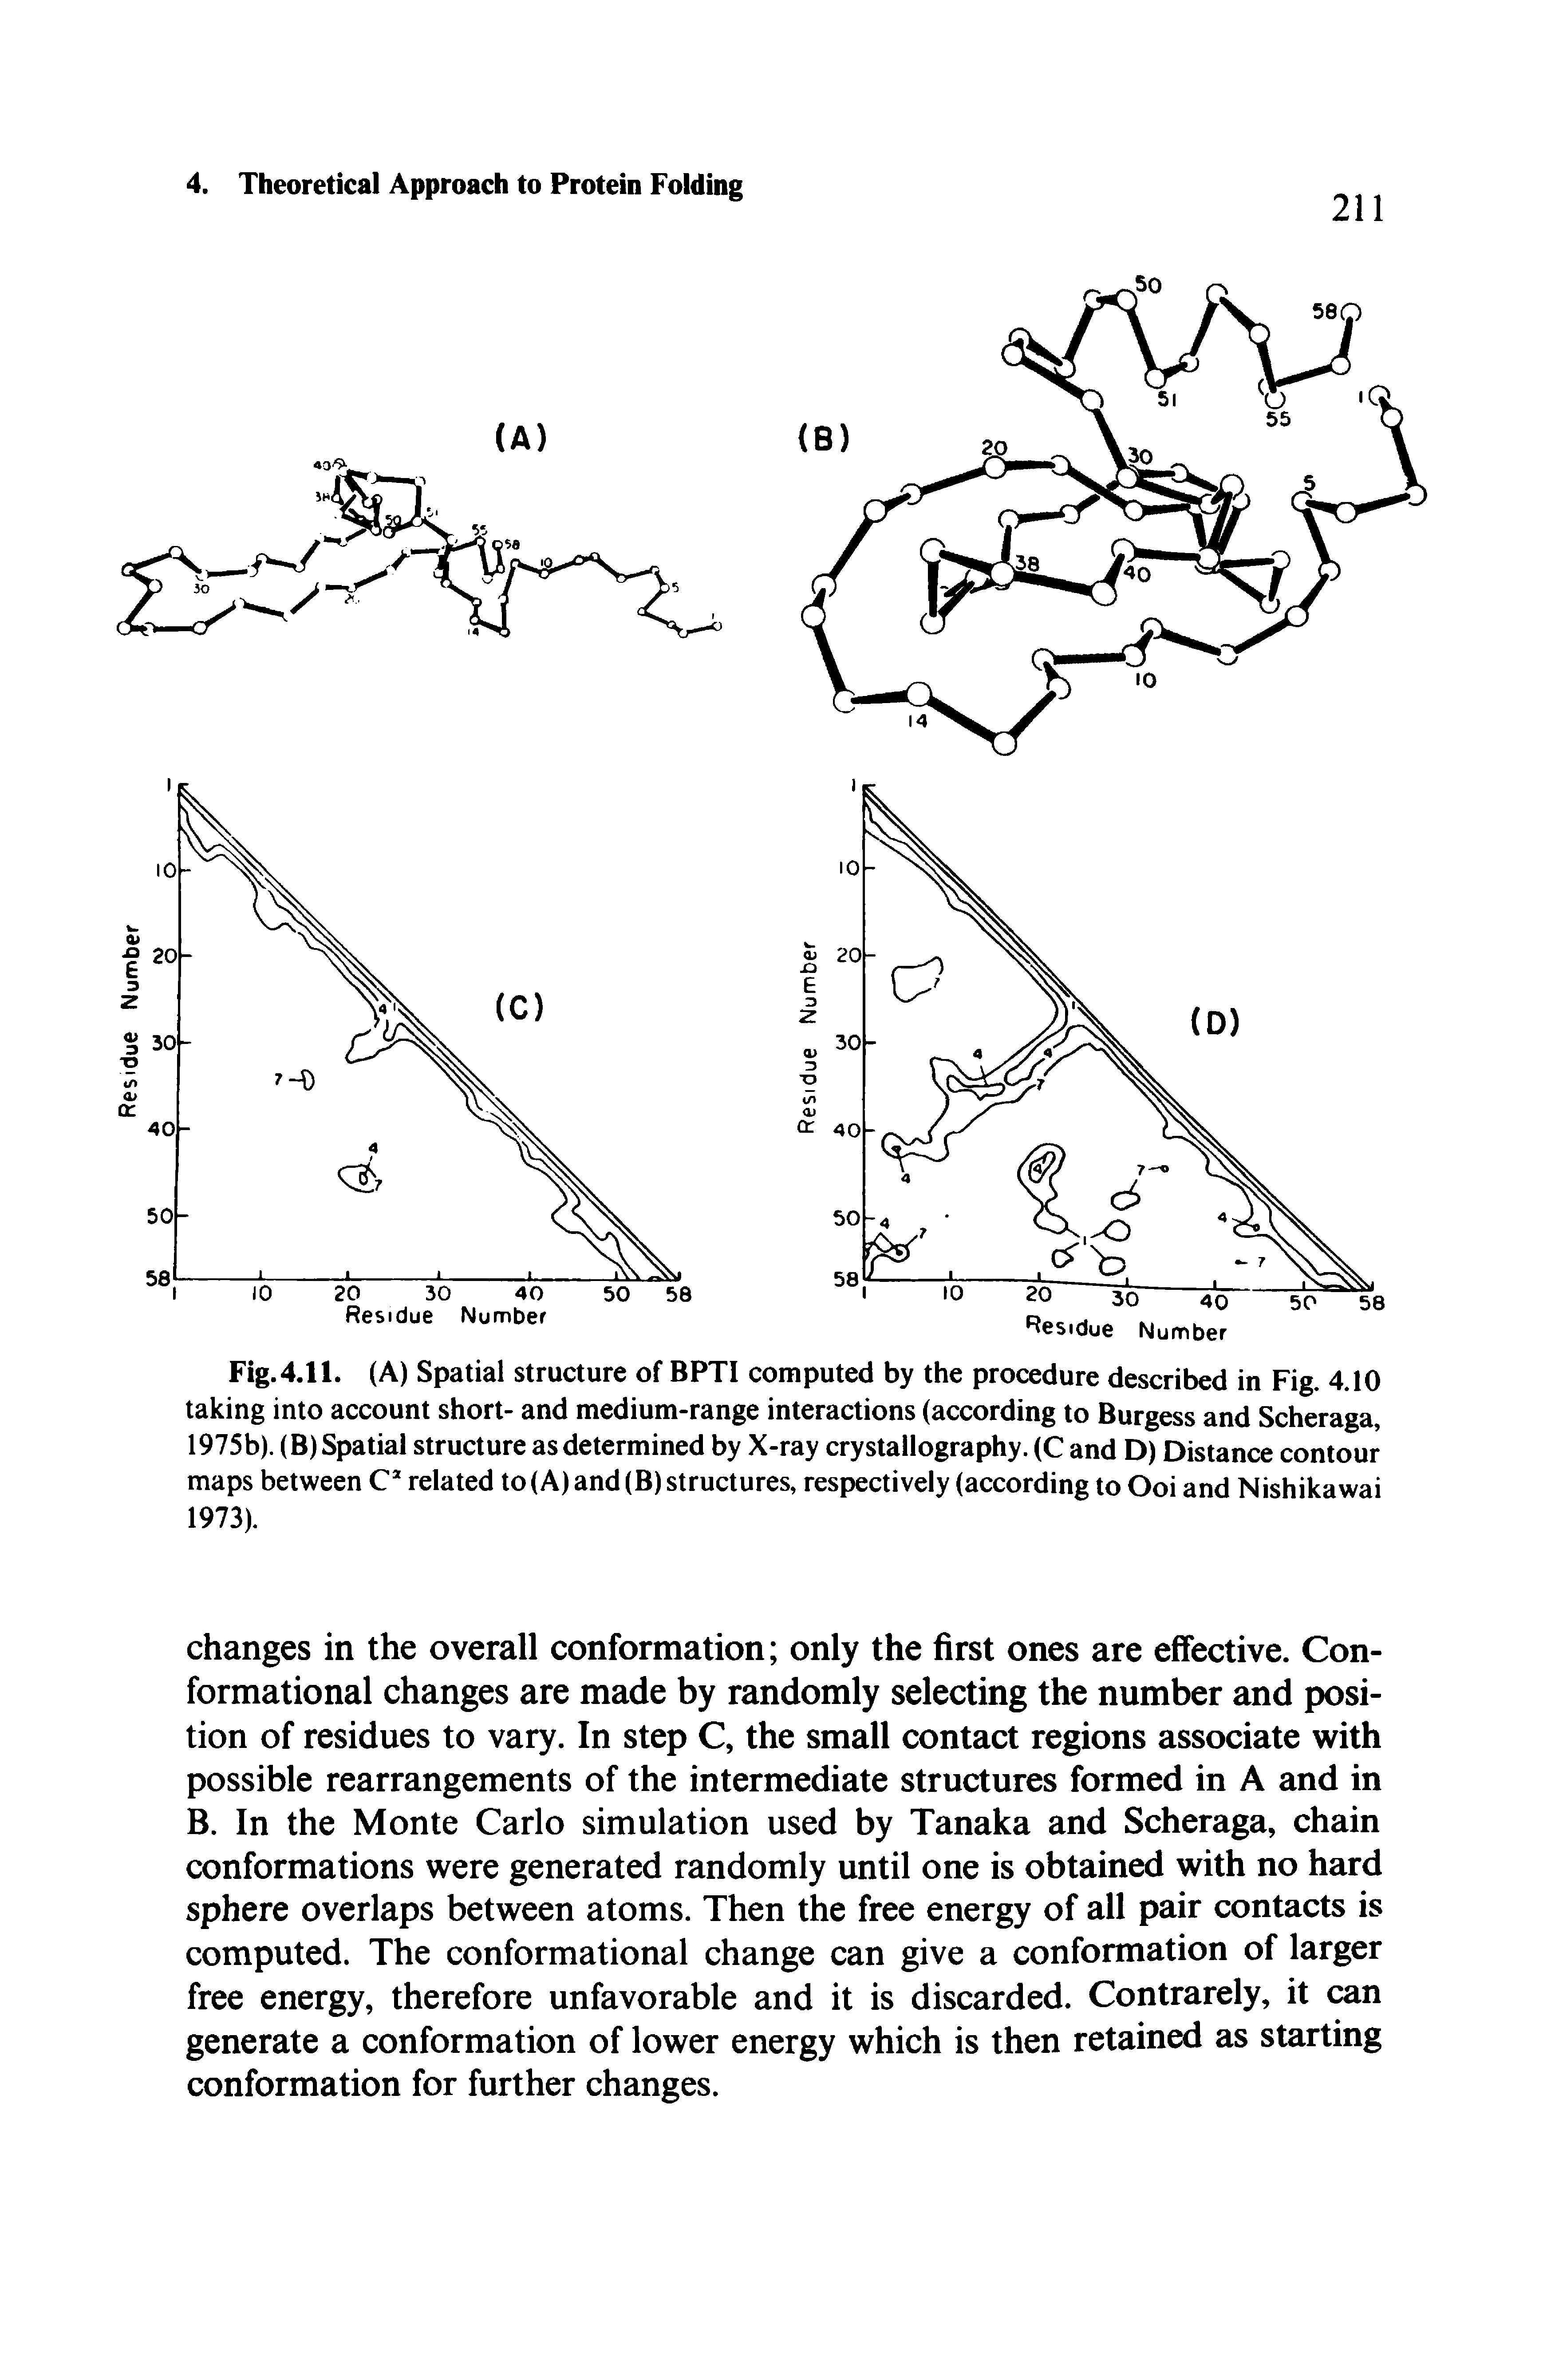 Fig.4.11. (A) Spatial structure of BPTI computed by the procedure described in Fig. 4.10 taking into account short- and medium-range interactions (according to Burgess and Scheraga, 1975b). (B) Spatial structure as determined by X-ray crystallography. (C and D) Distance contour maps between C related to (A) and (B) structures, respectively (according to Ooi and Nishikawai 1973).